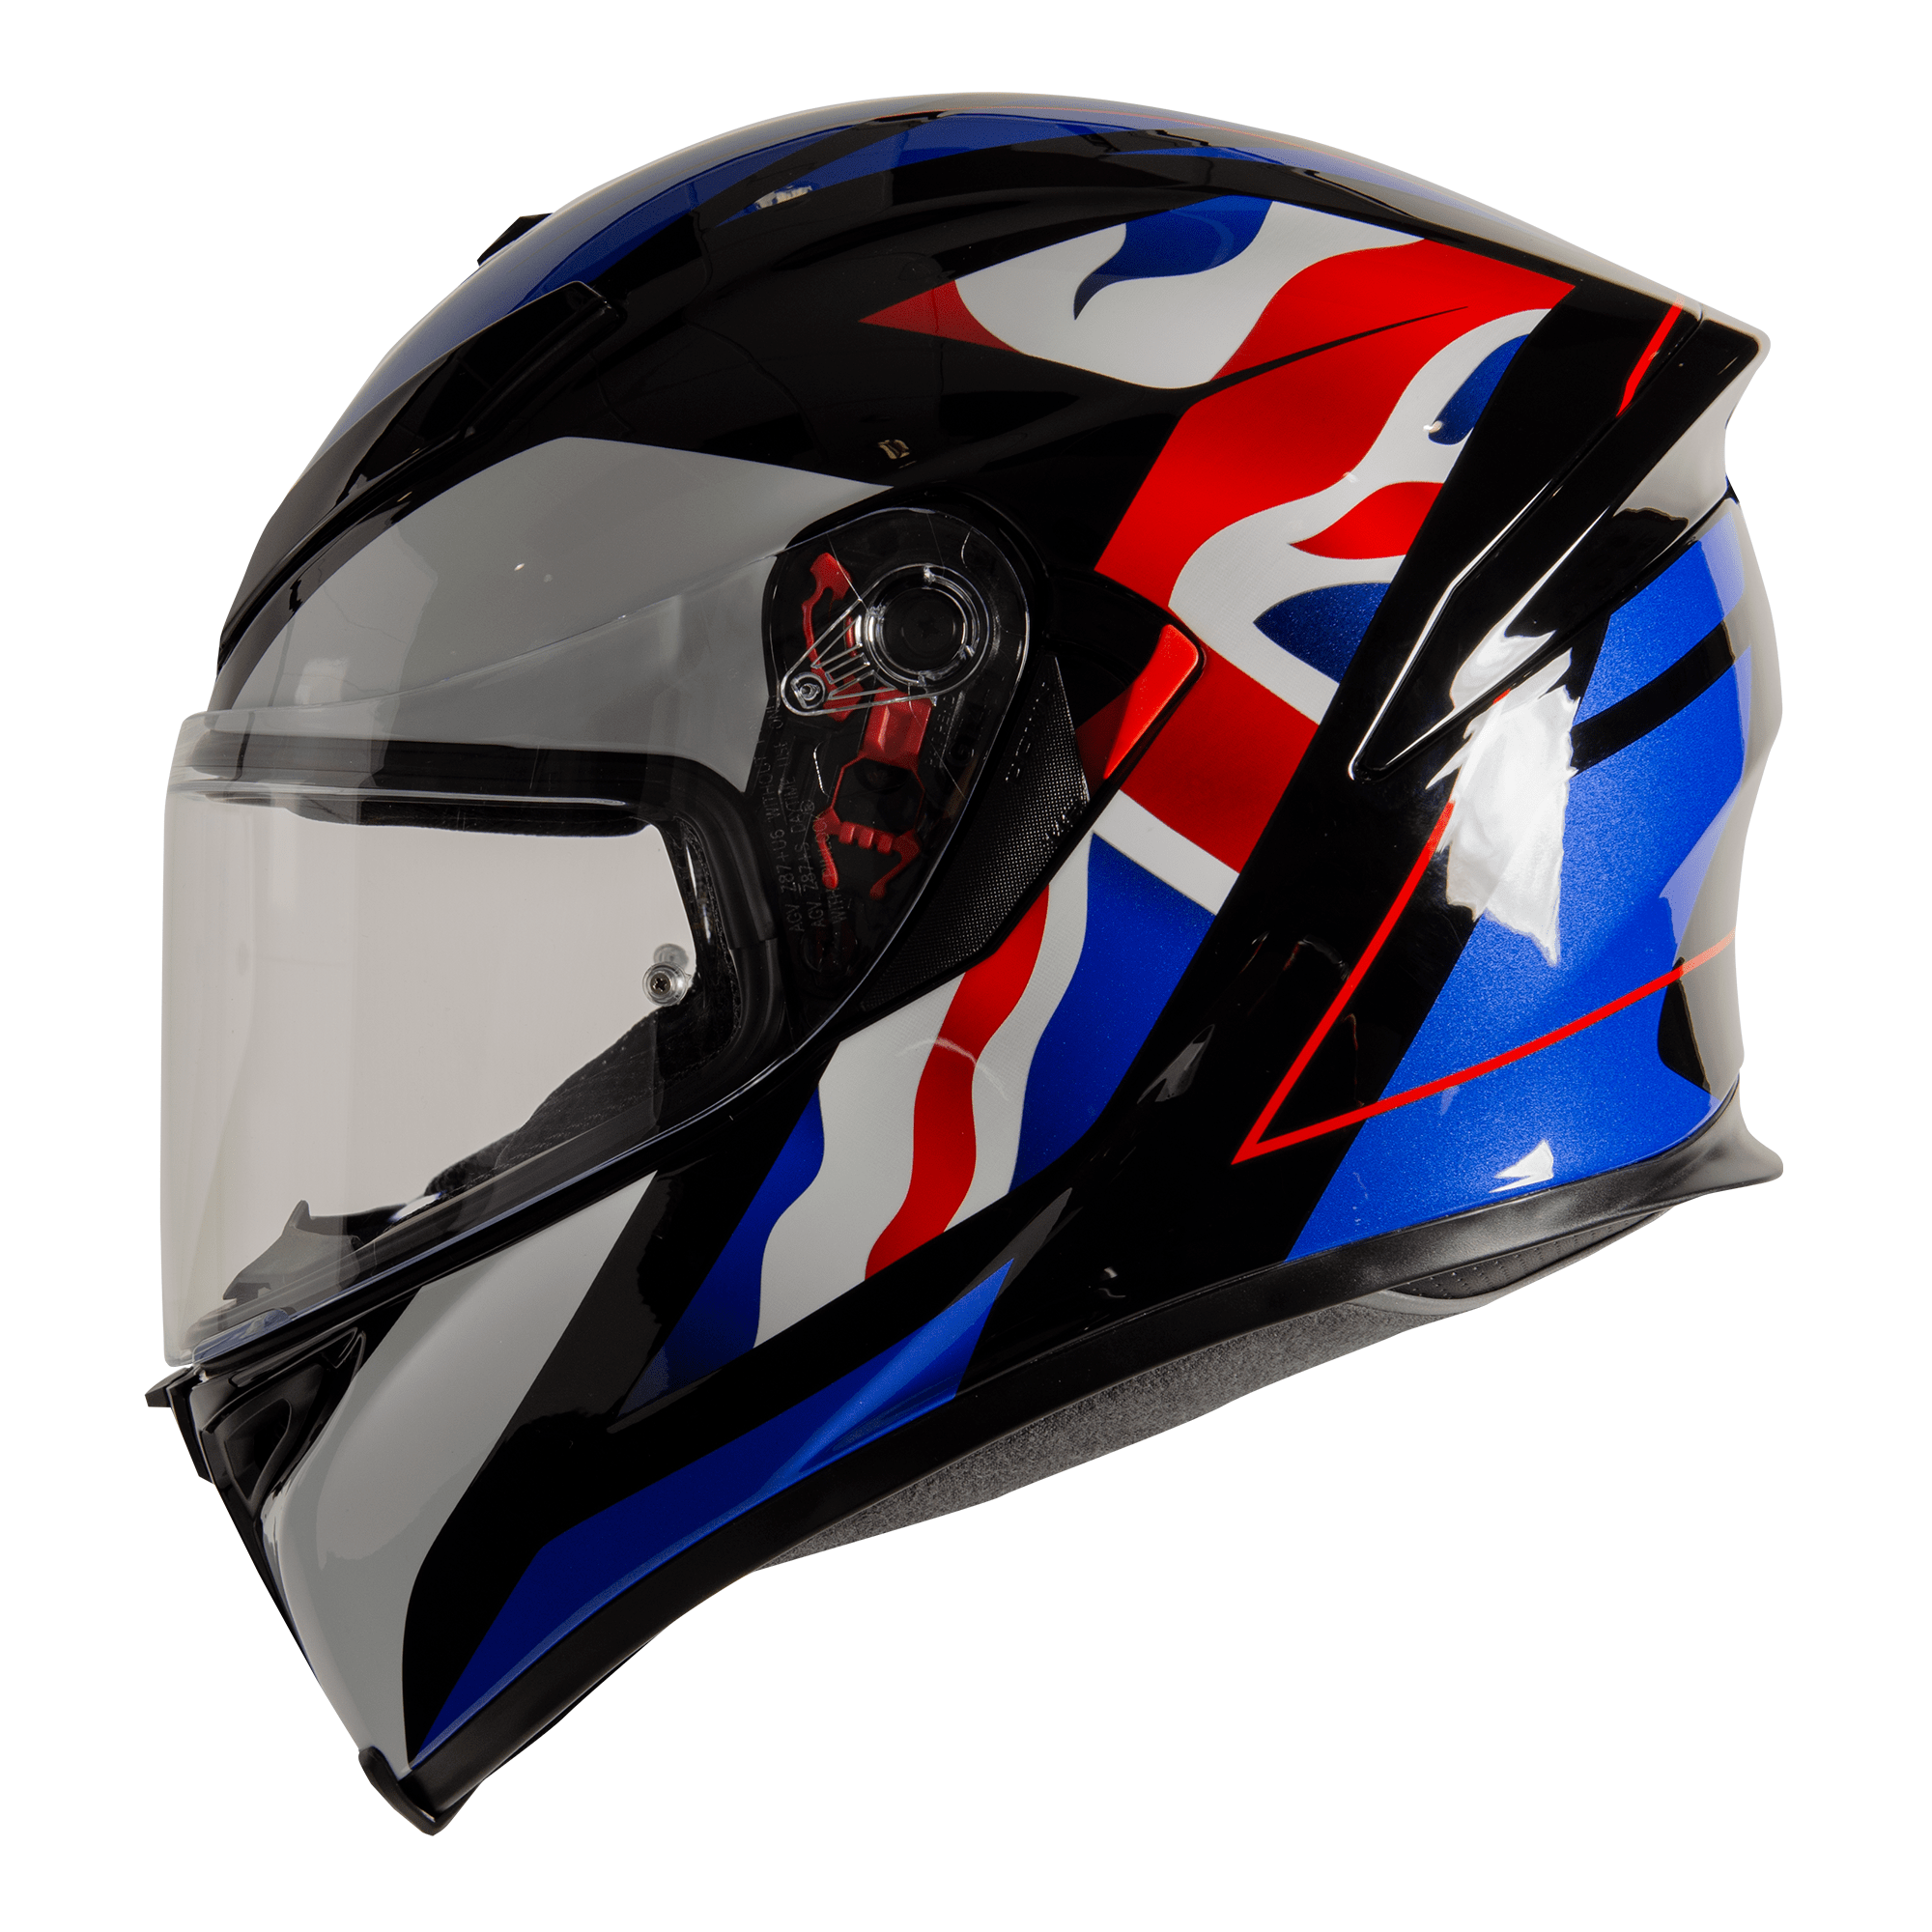 AGV K5-S Union Jack | AGV Motorcycle Helmets | FREE UK DELIVERY